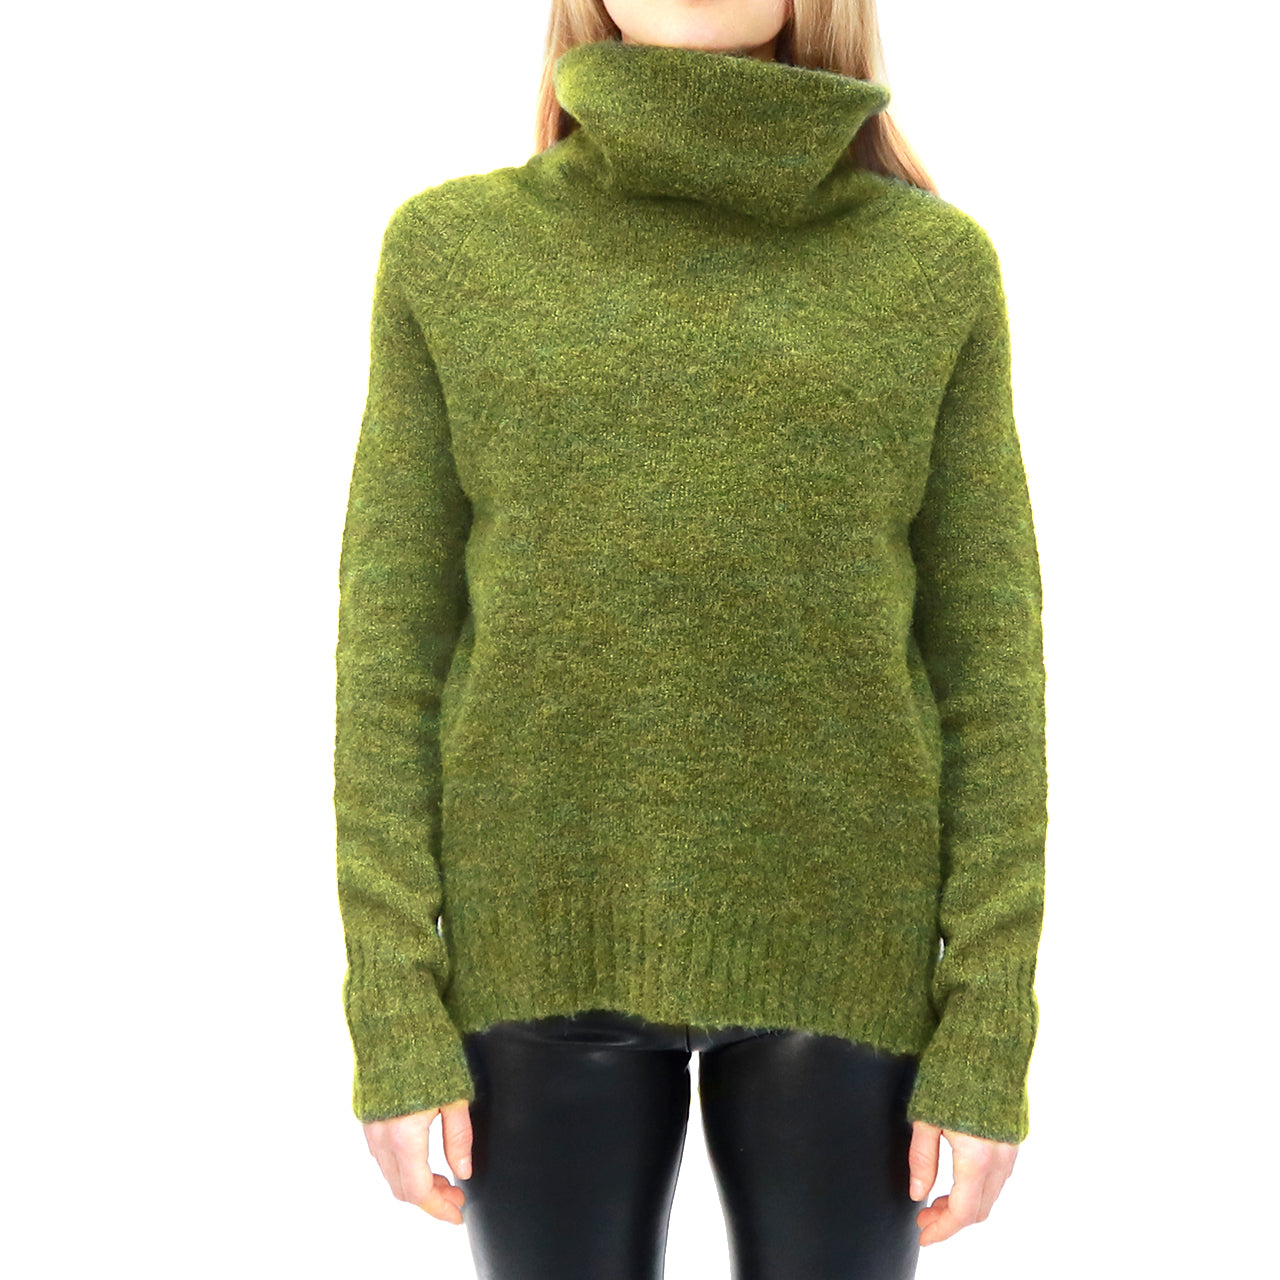 RDInternational RD Style Ladies Knit Sweater - Lemon Lime Mix available at The Good Life Boutique